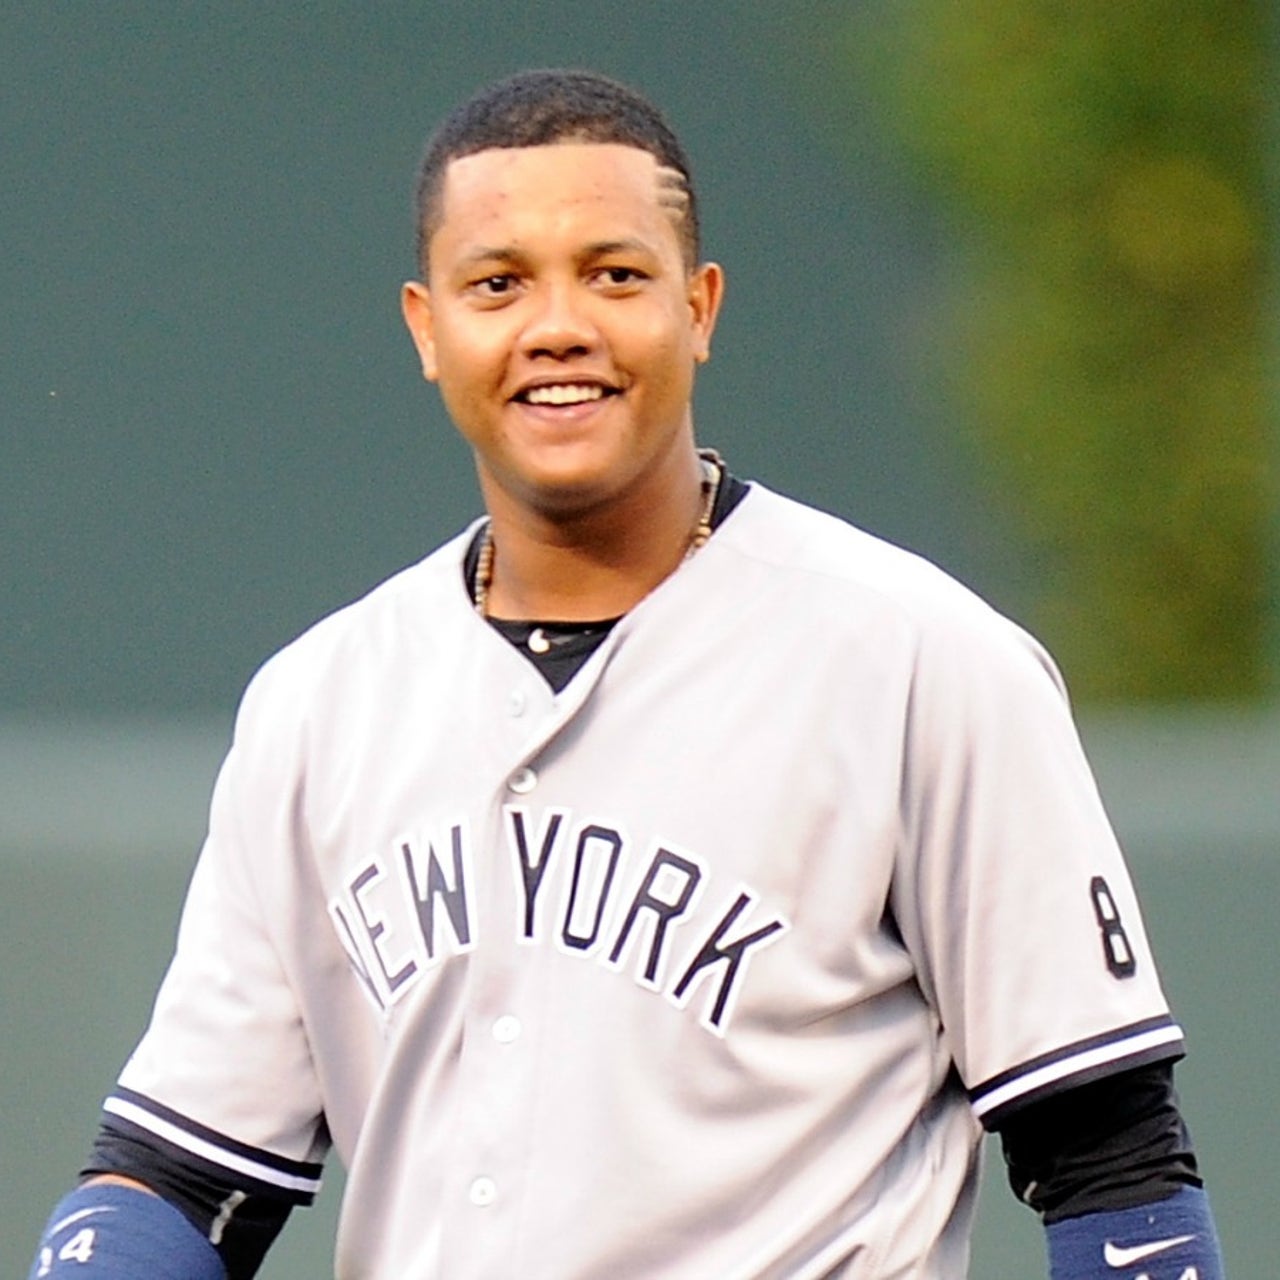 Notebook: Starlin Castro's subtle impact on Yankees' success